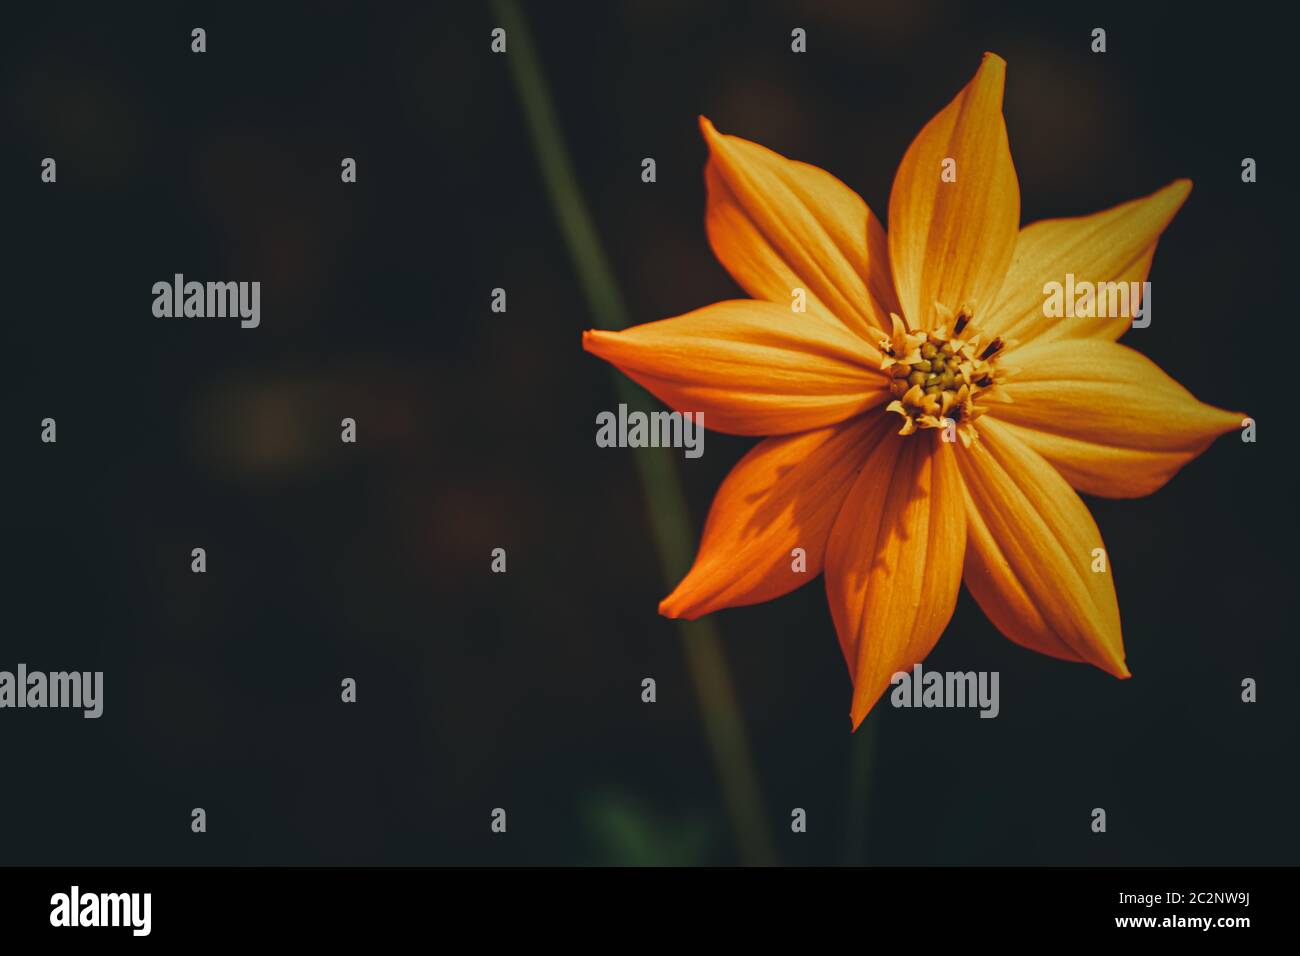 Marigold flower against a dark background showing the concept of Floral Spring theme Stock Photo